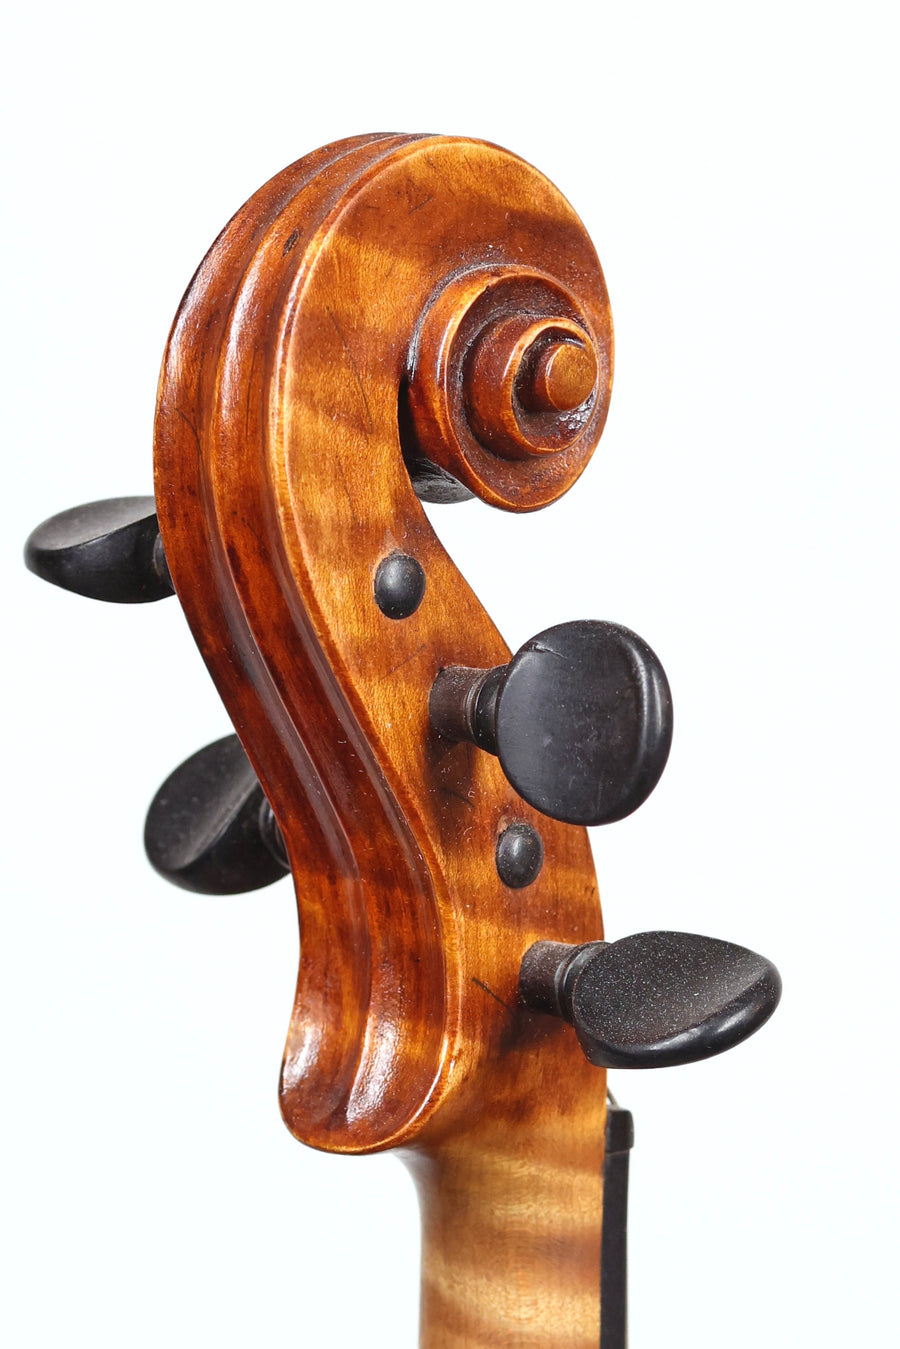 Violin #49 by Dudley Reed, 1950